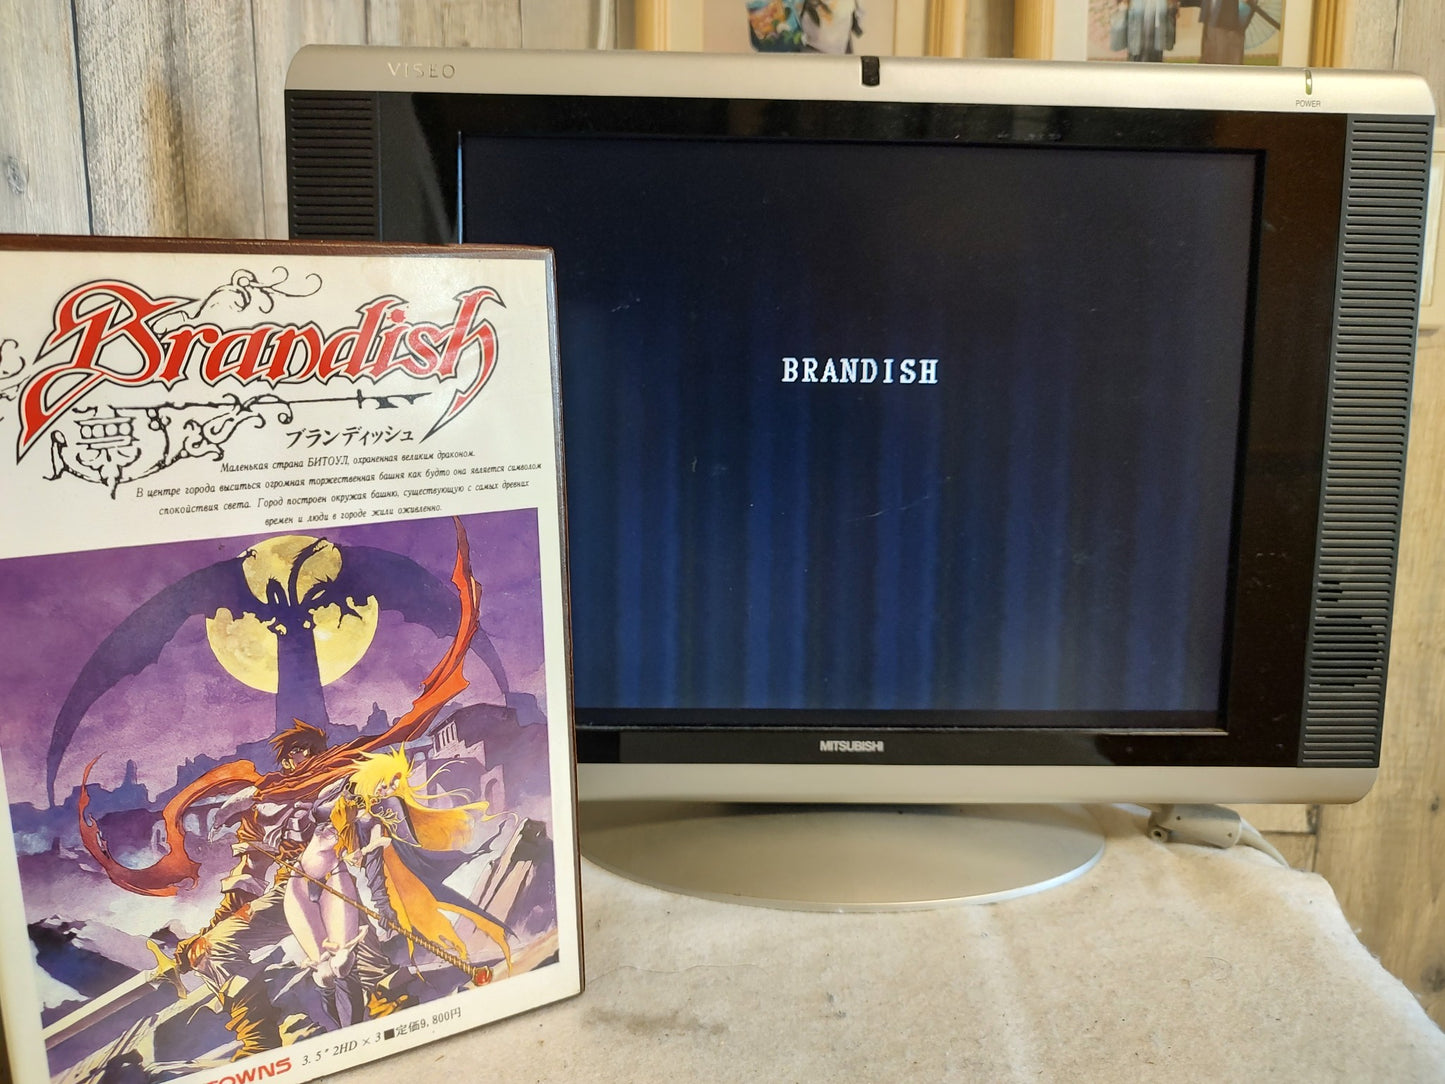 BRANDISH FM TOWNS Marty Game w/Manual, Papers and Box set, Working-f1213-